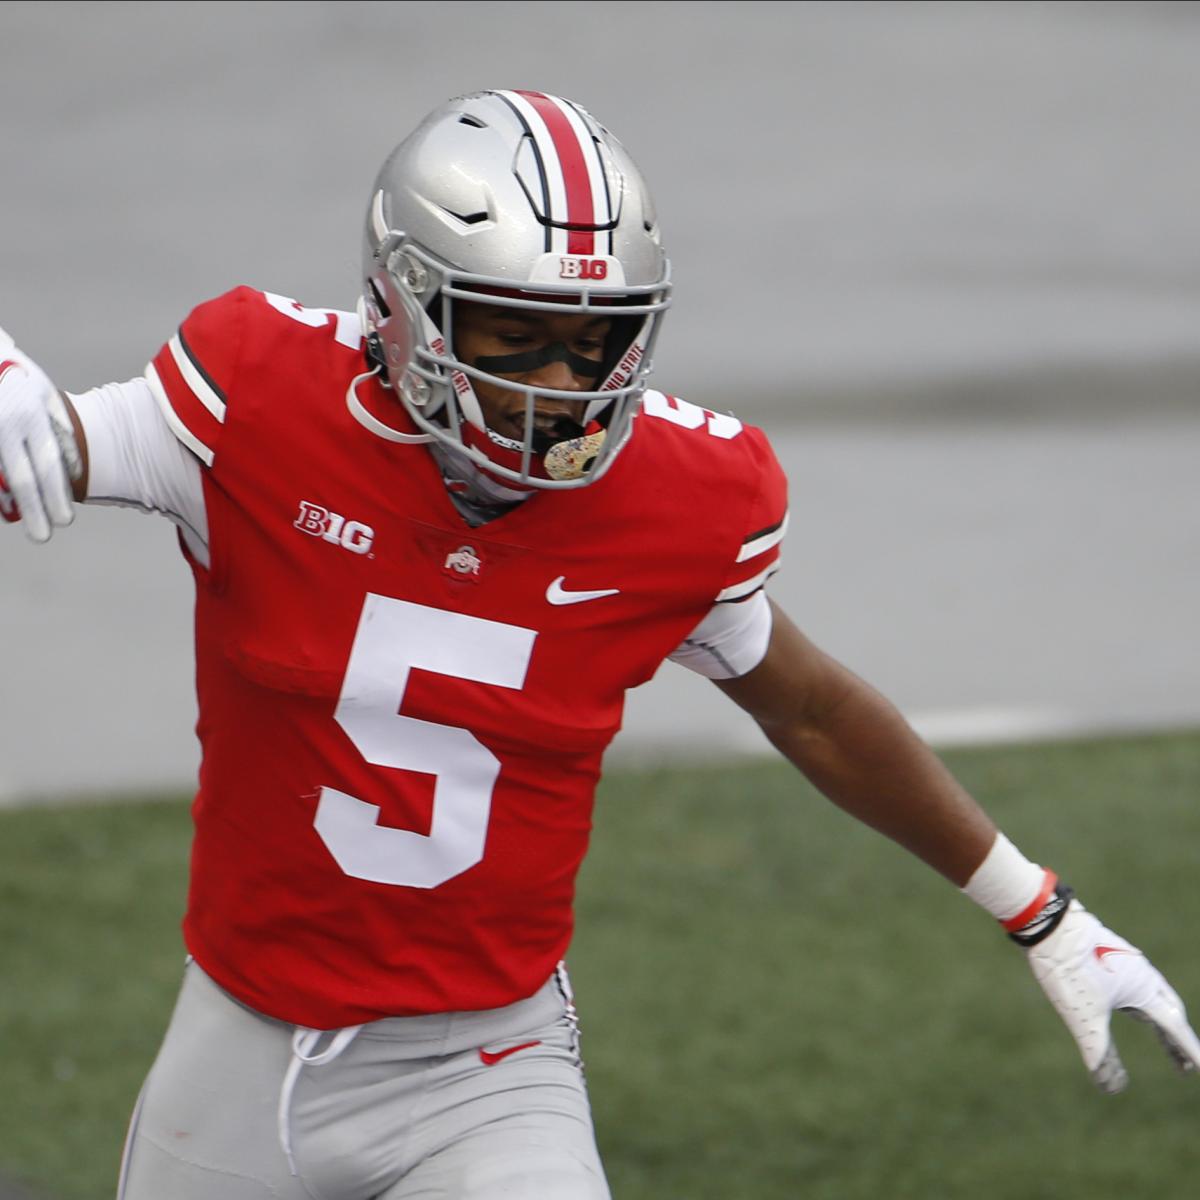 Bowl Predictions 2020: College Football Playoff Predictions for Top Teams